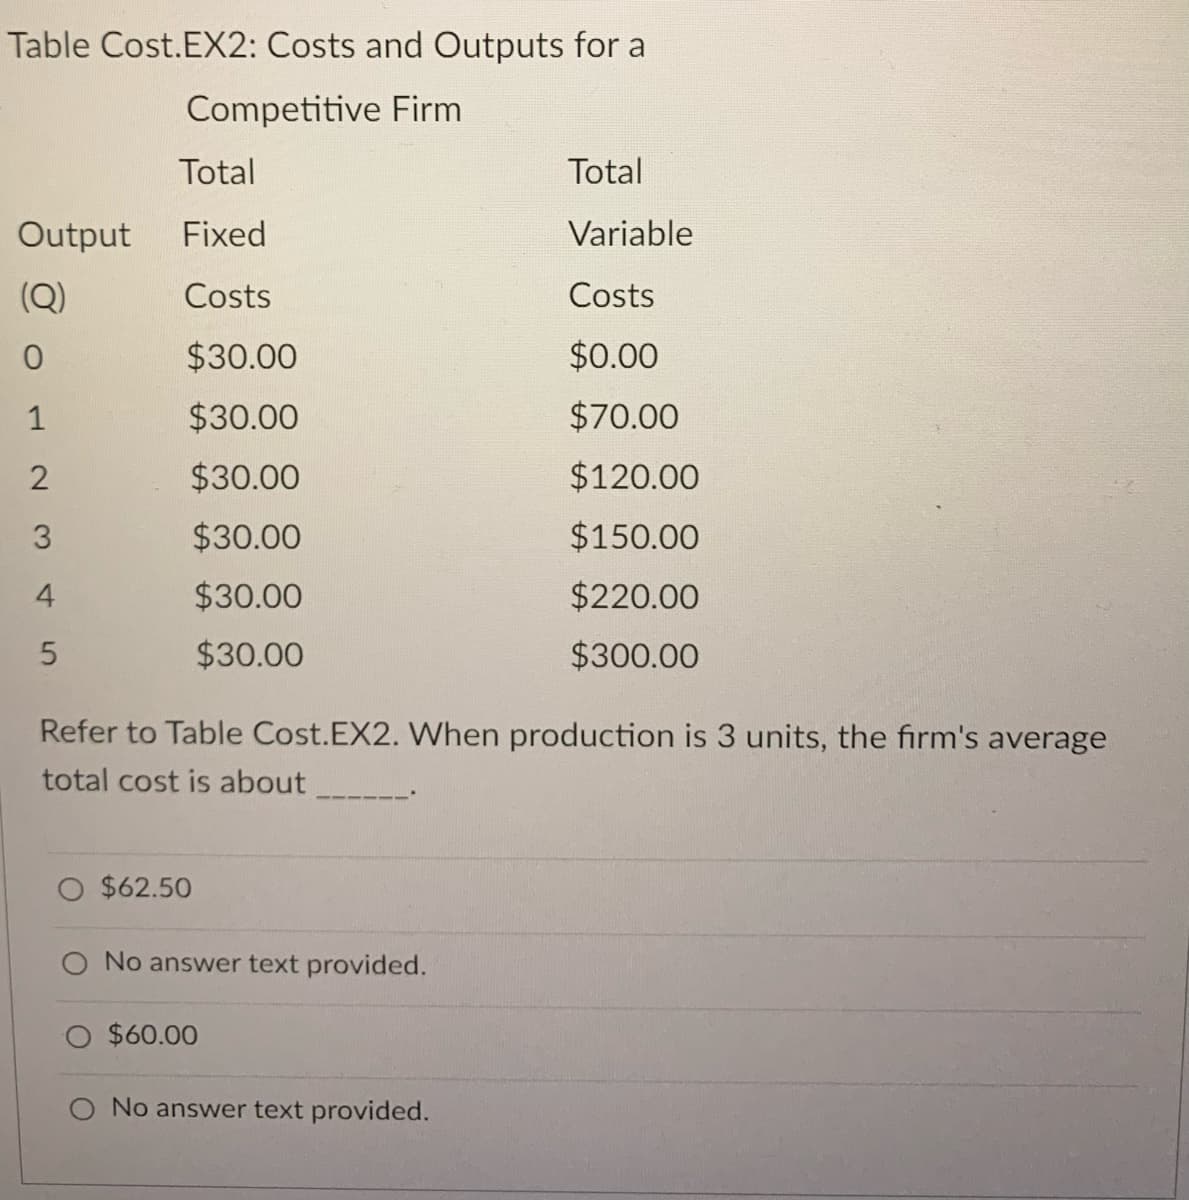 Table Cost.EX2: Costs and Outputs for a
Competitive Firm
Total
Total
Output
Fixed
Variable
(Q)
Costs
Costs
$30.00
$0.00
1
$30.00
$70.00
$30.00
$120.00
$30.00
$150.00
$30.00
$220.00
$30.00
$300.00
Refer to Table Cost.EX2. When production is 3 units, the firm's average
total cost is about
$62.50
O No answer text provided.
$60.00
O No answer text provided.
